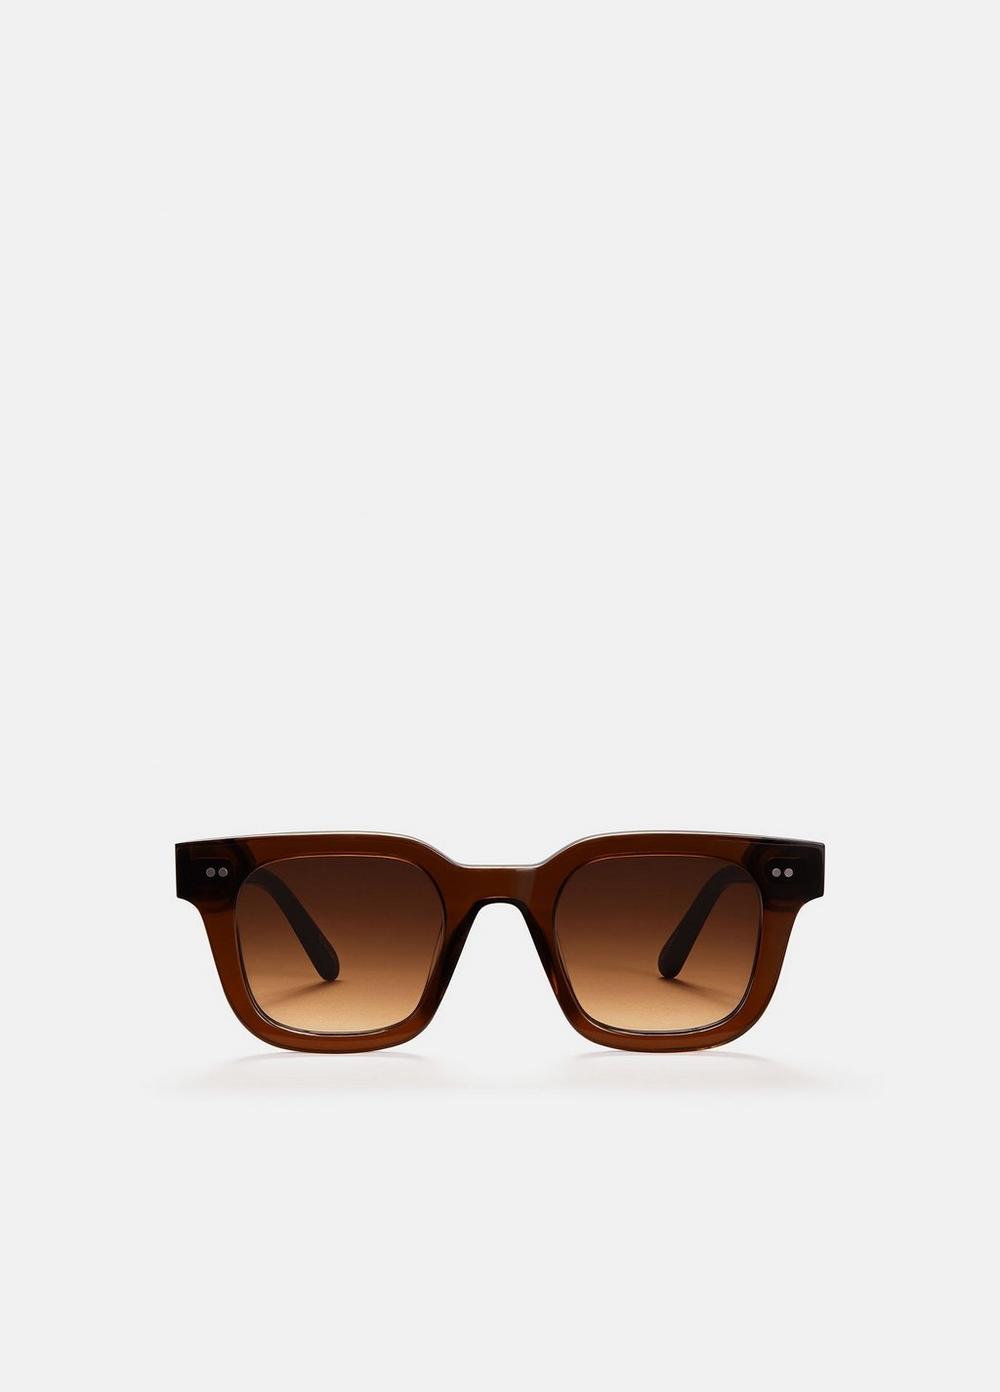 Chimi 04 Sunglasses, Brown Vince